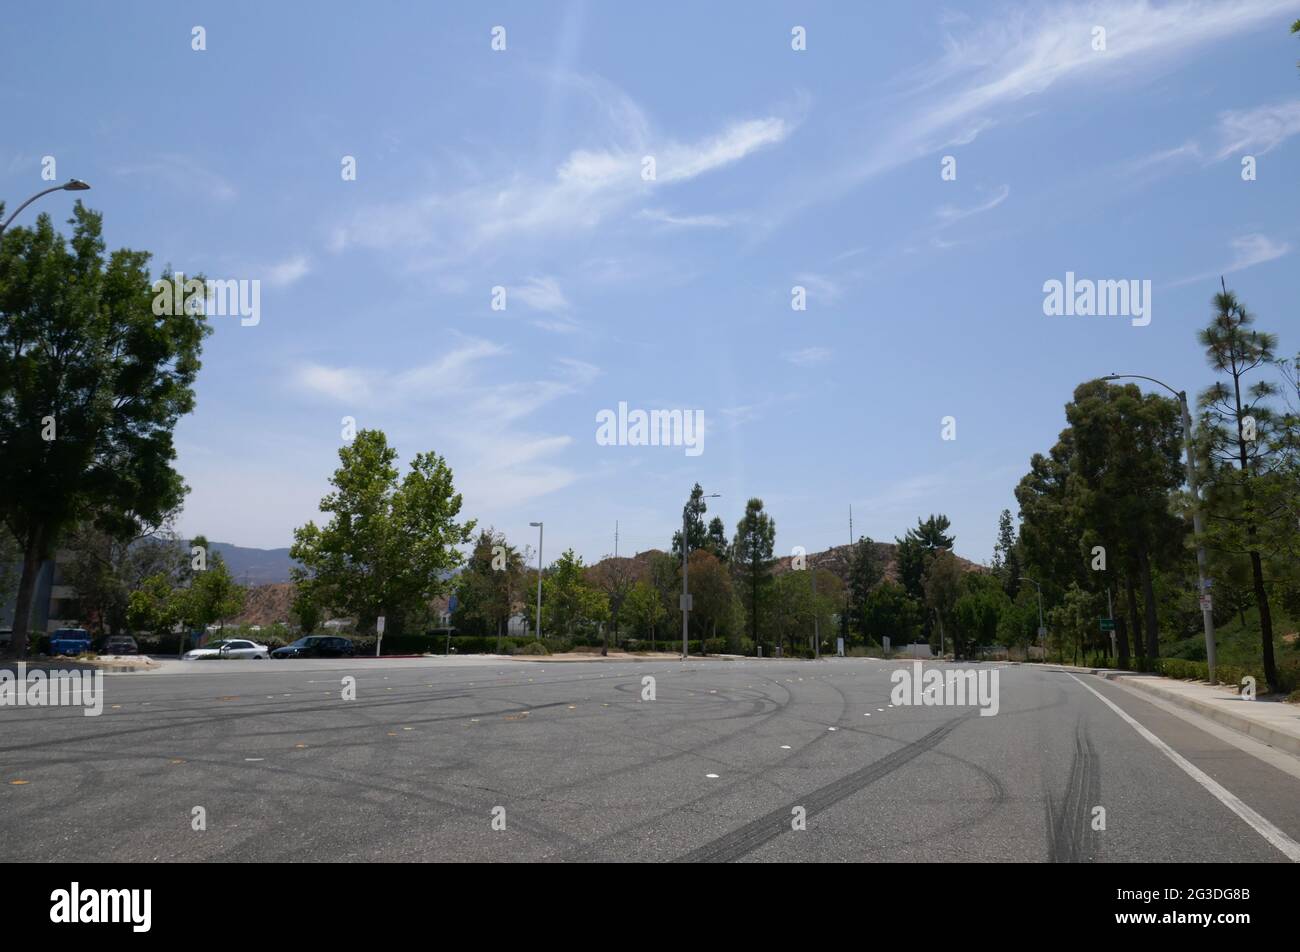 Valencia, California, USA 15th June 2021 A general view of atmosphere of actor Paul Walker's Fatal Car Crash Location at 28385 Constellation Road where Roger Rodas was driving with Paul Walker on November 30, 2013 and they crashed here in Valencia, California, USA. Photo by Barry King/Alamy Stock Photo Stock Photo